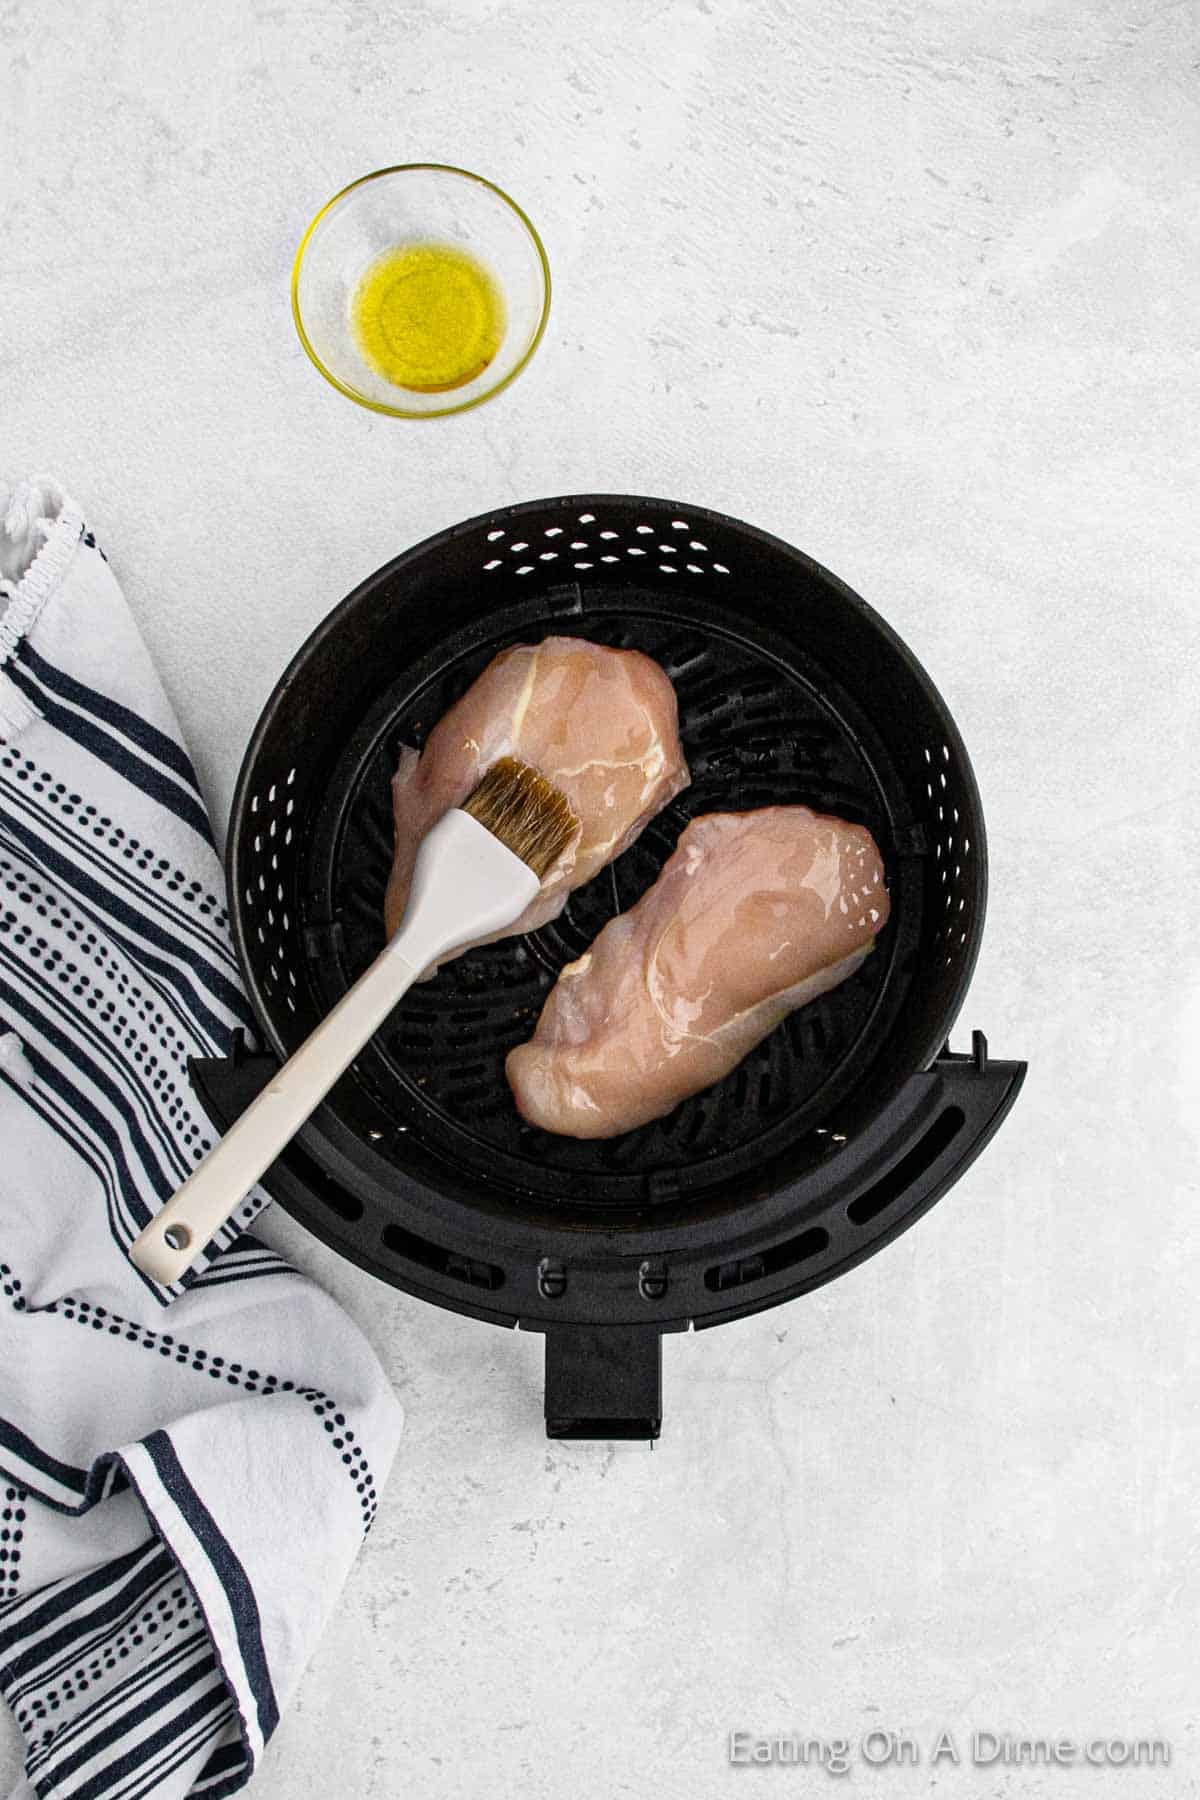 Brushing oil on the chicken breast in the air fryer basket